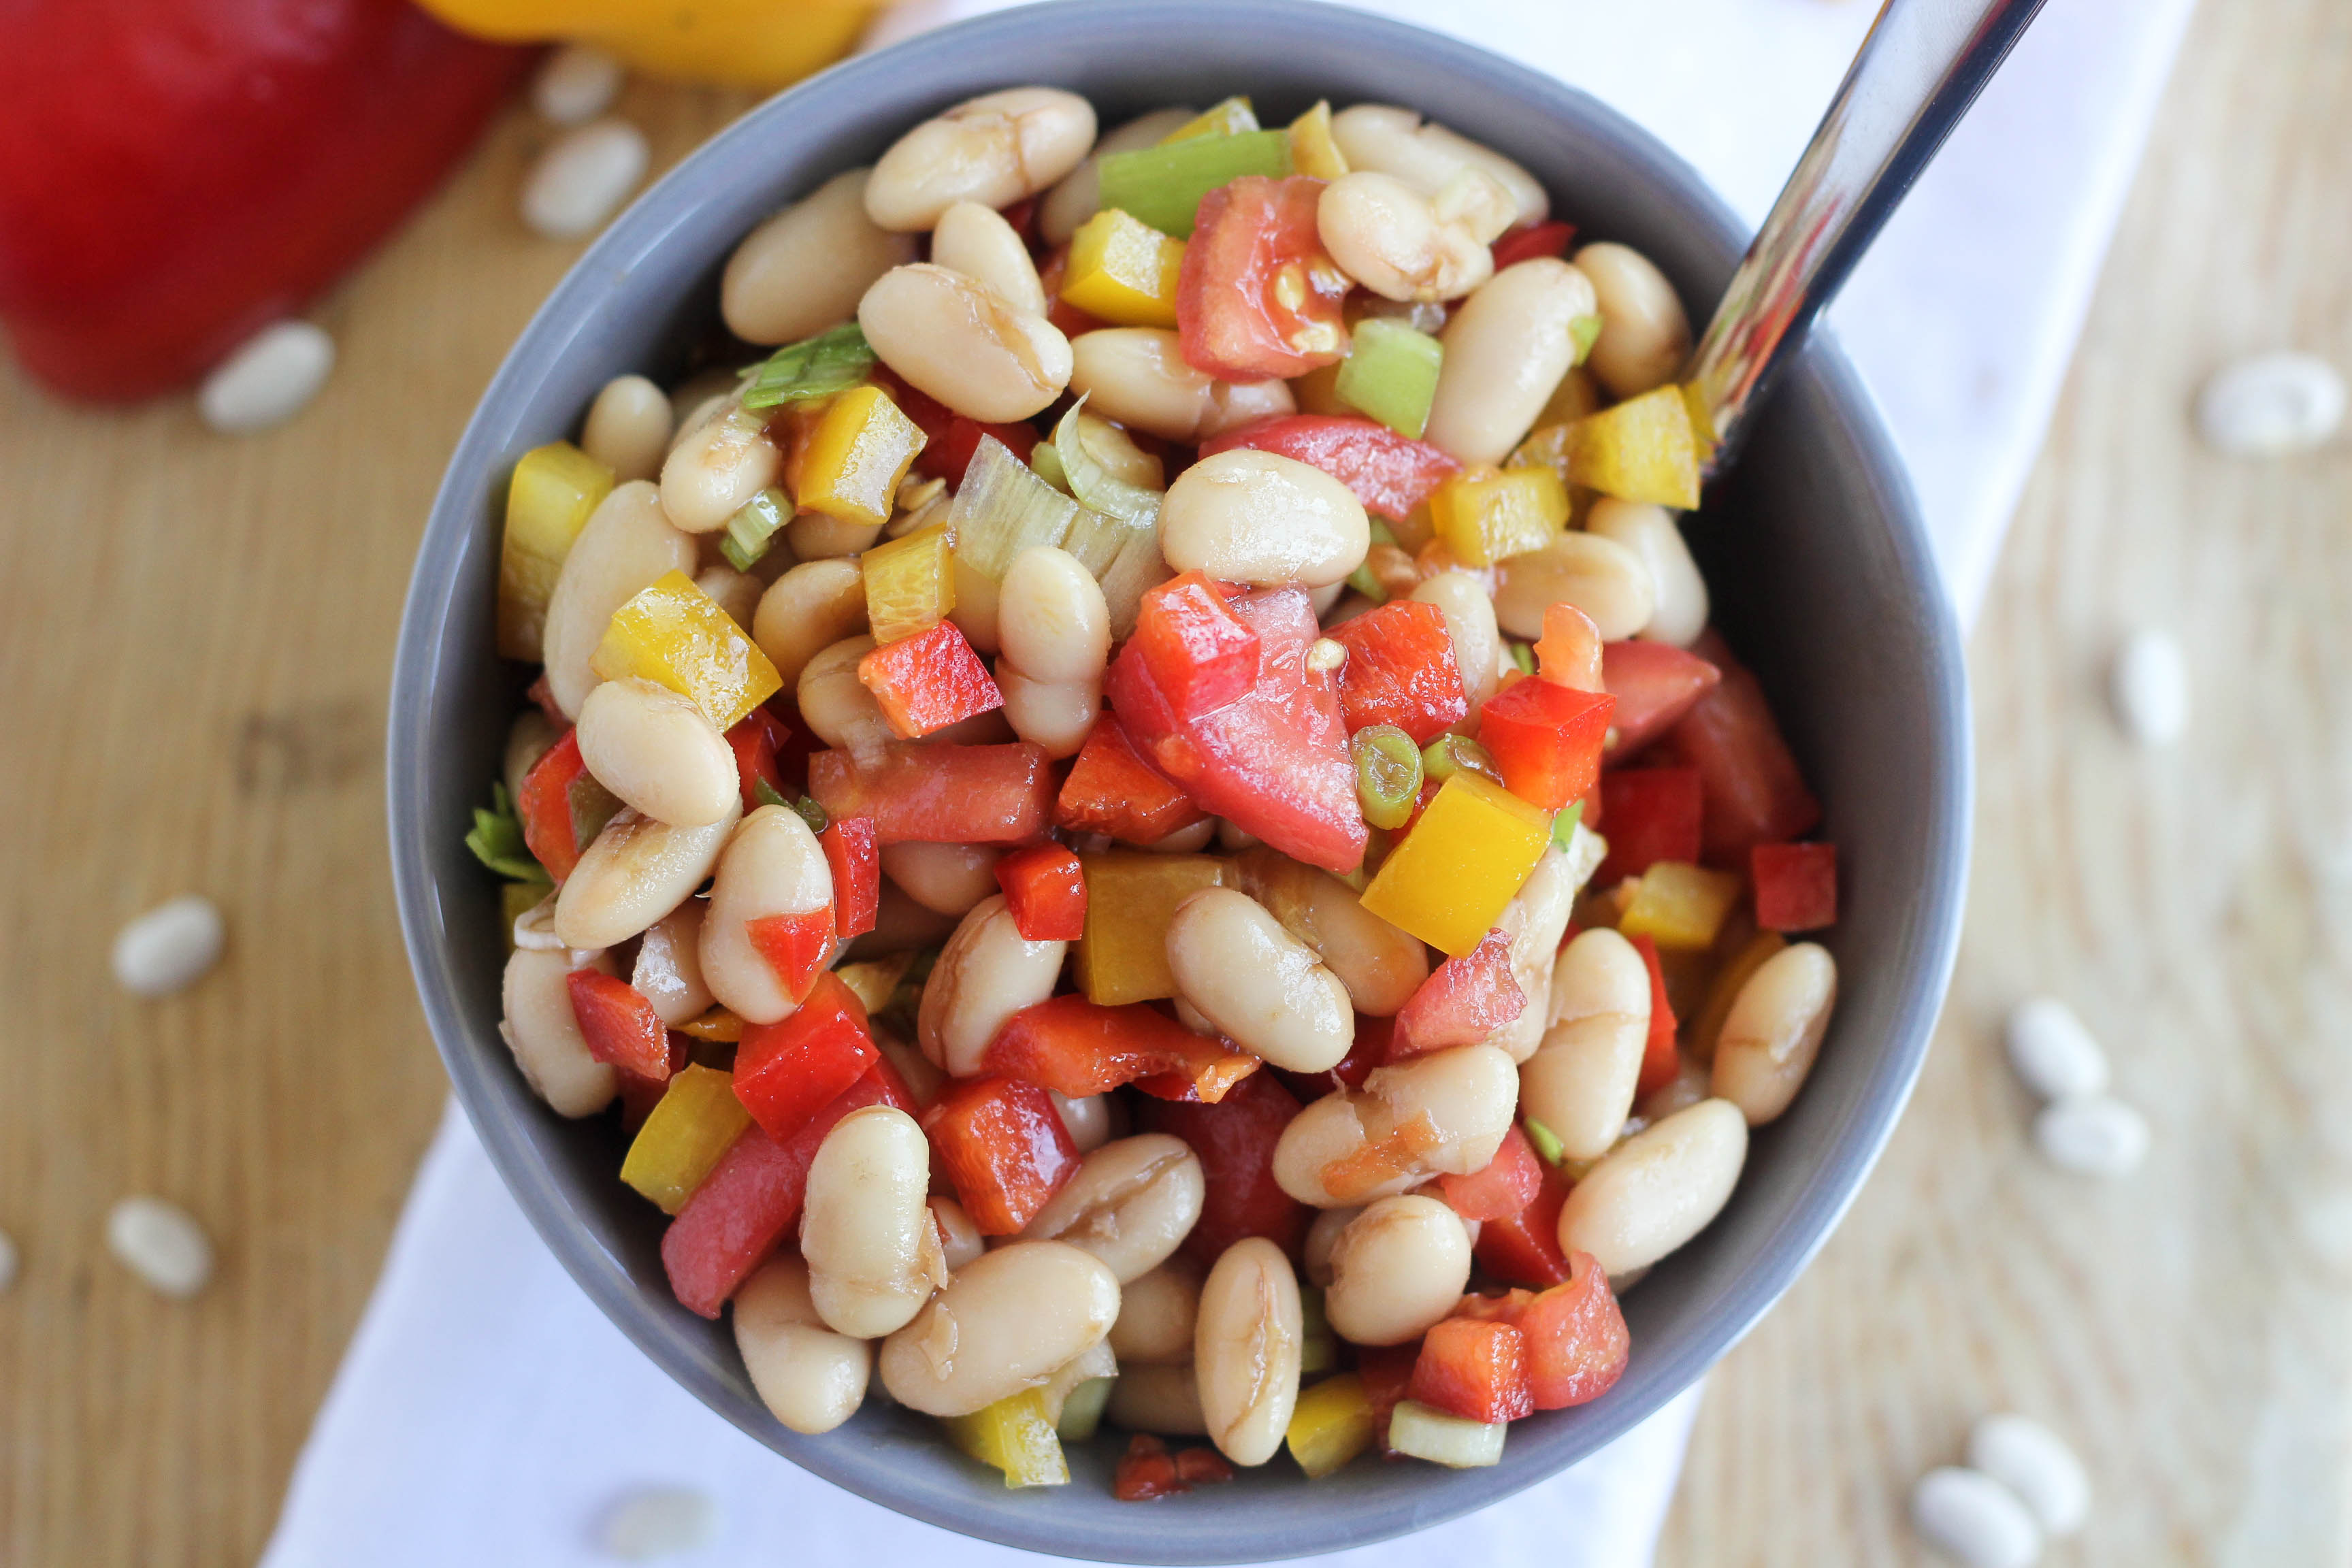 An image depicting the simple white bean salad.